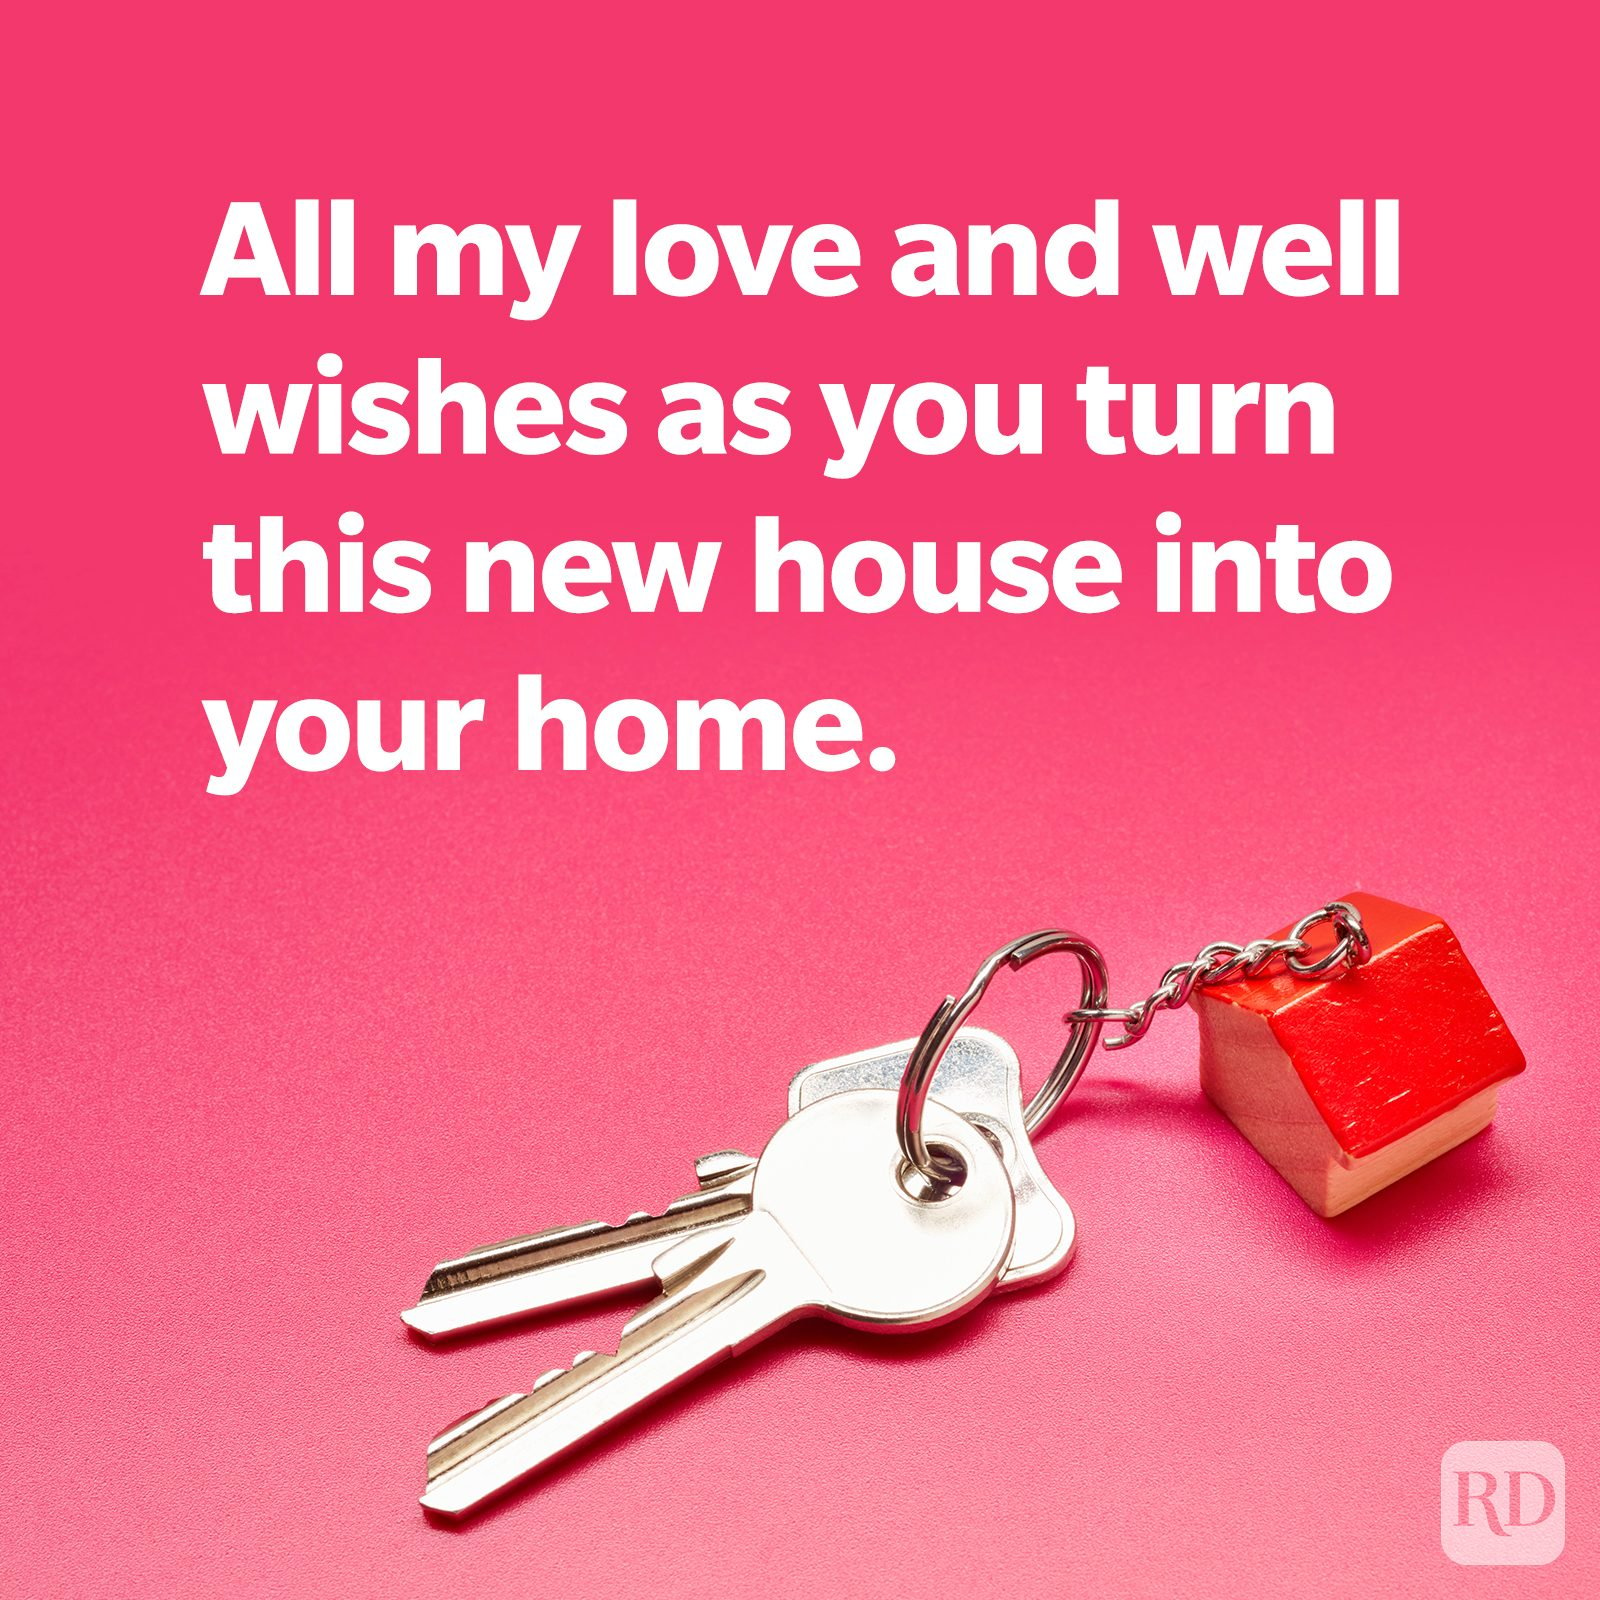 101 Thoughtful New Home WishesFT GettyImages 1131970162 ?fit=700